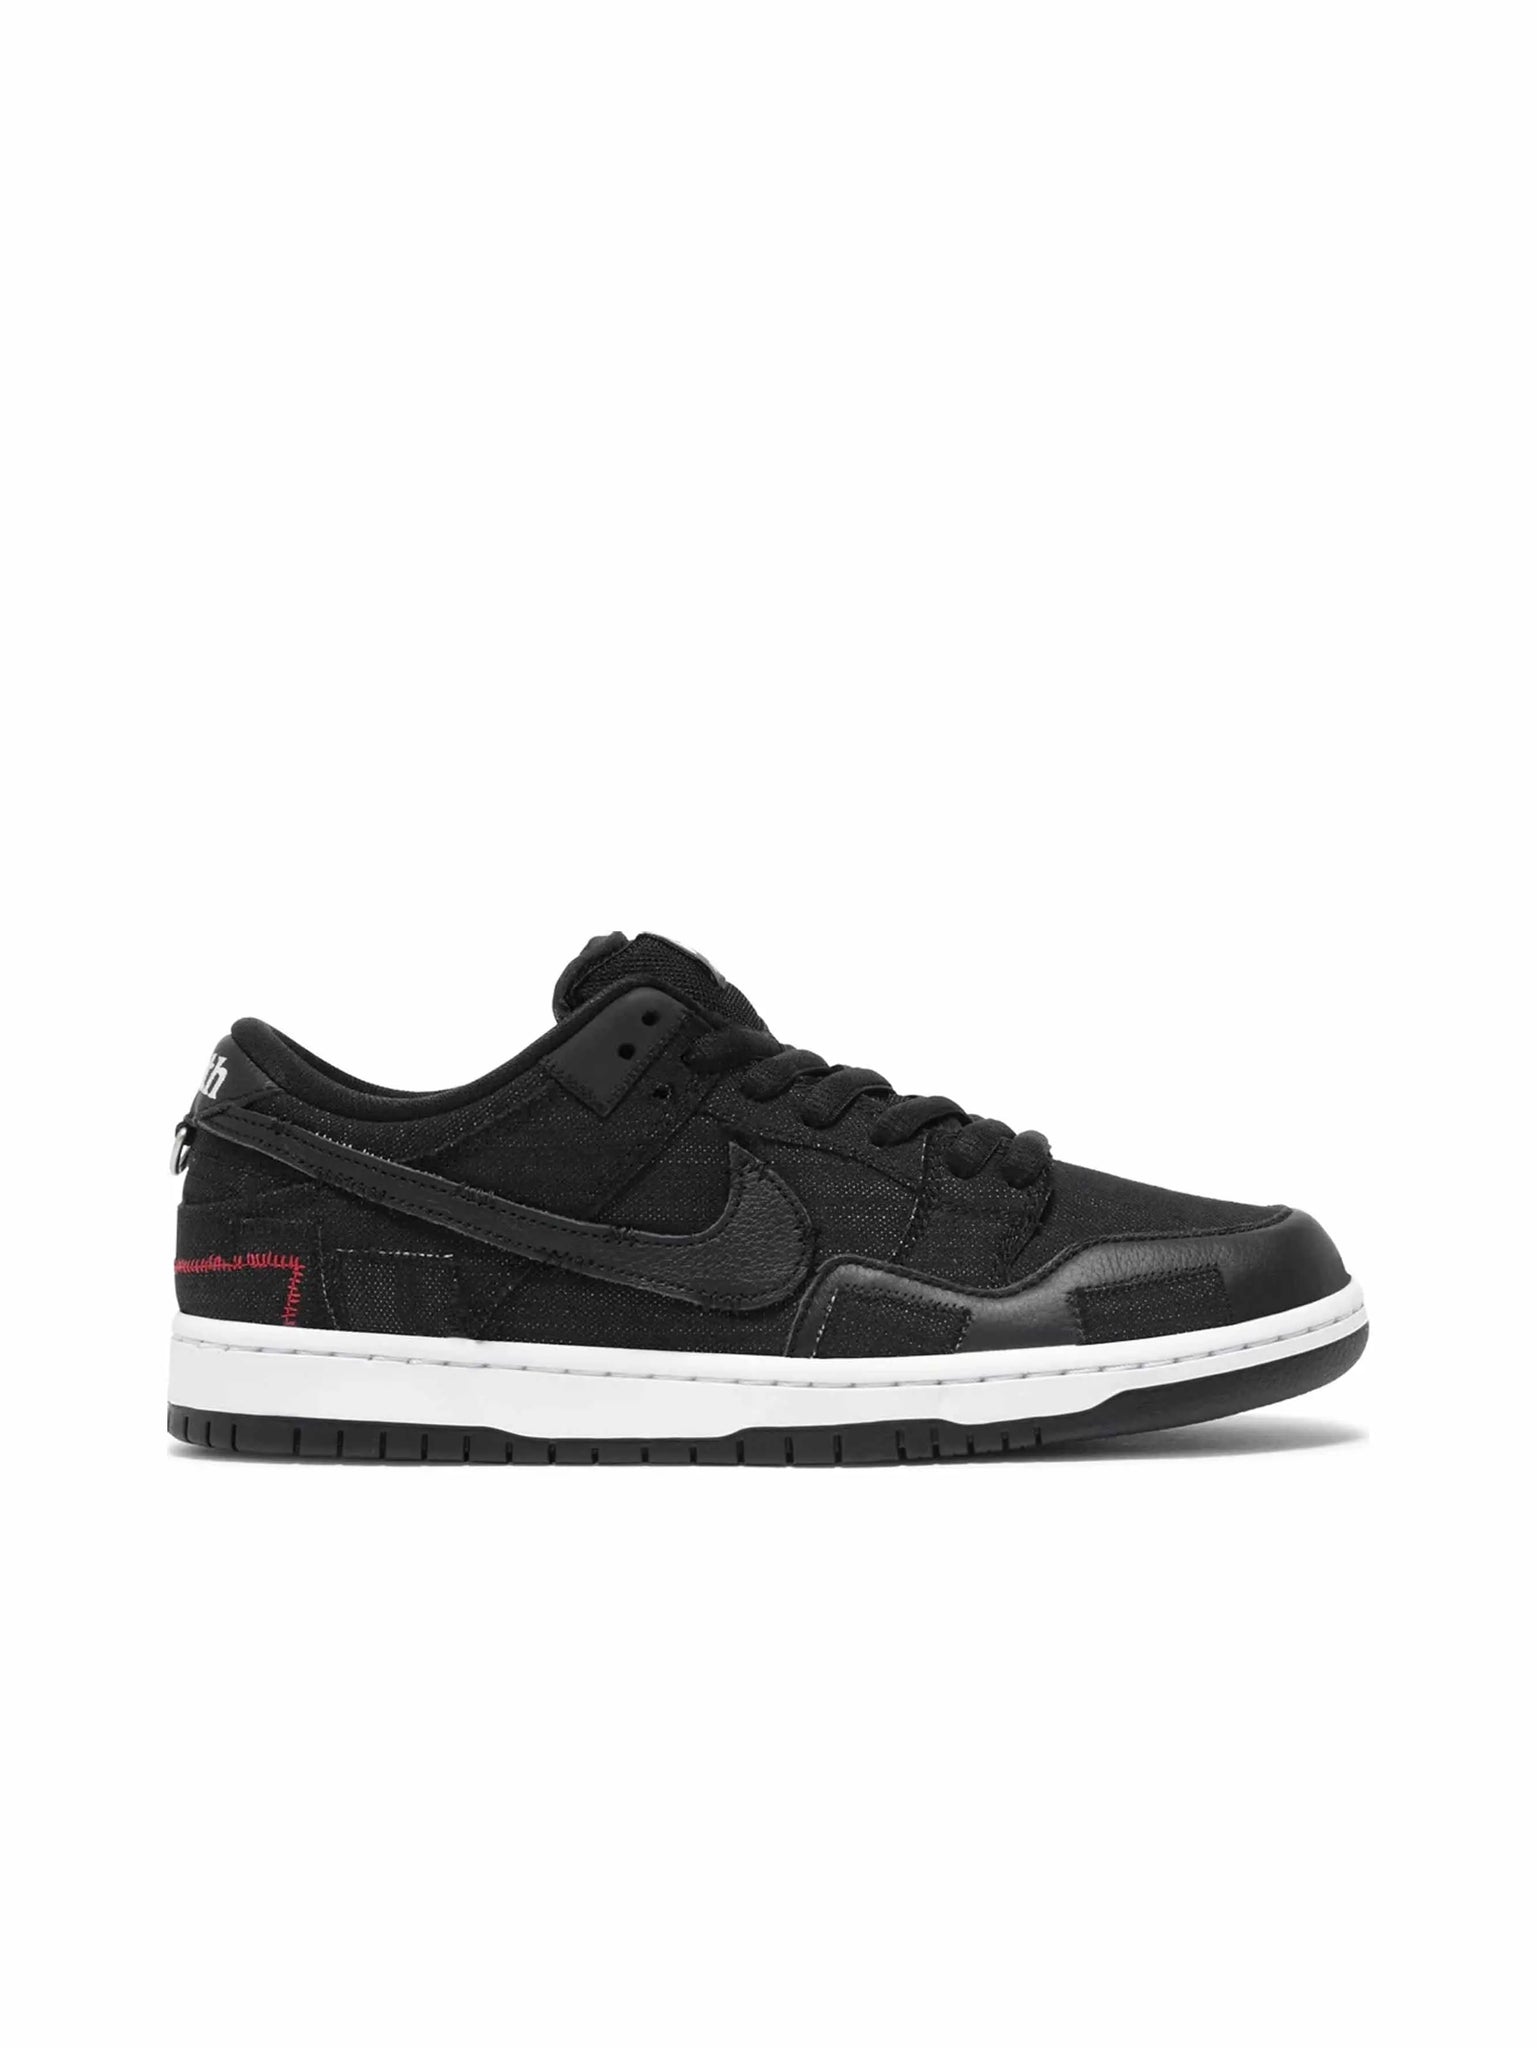 Nike SB Dunk Low Wasted Youth in Auckland, New Zealand - Shop name